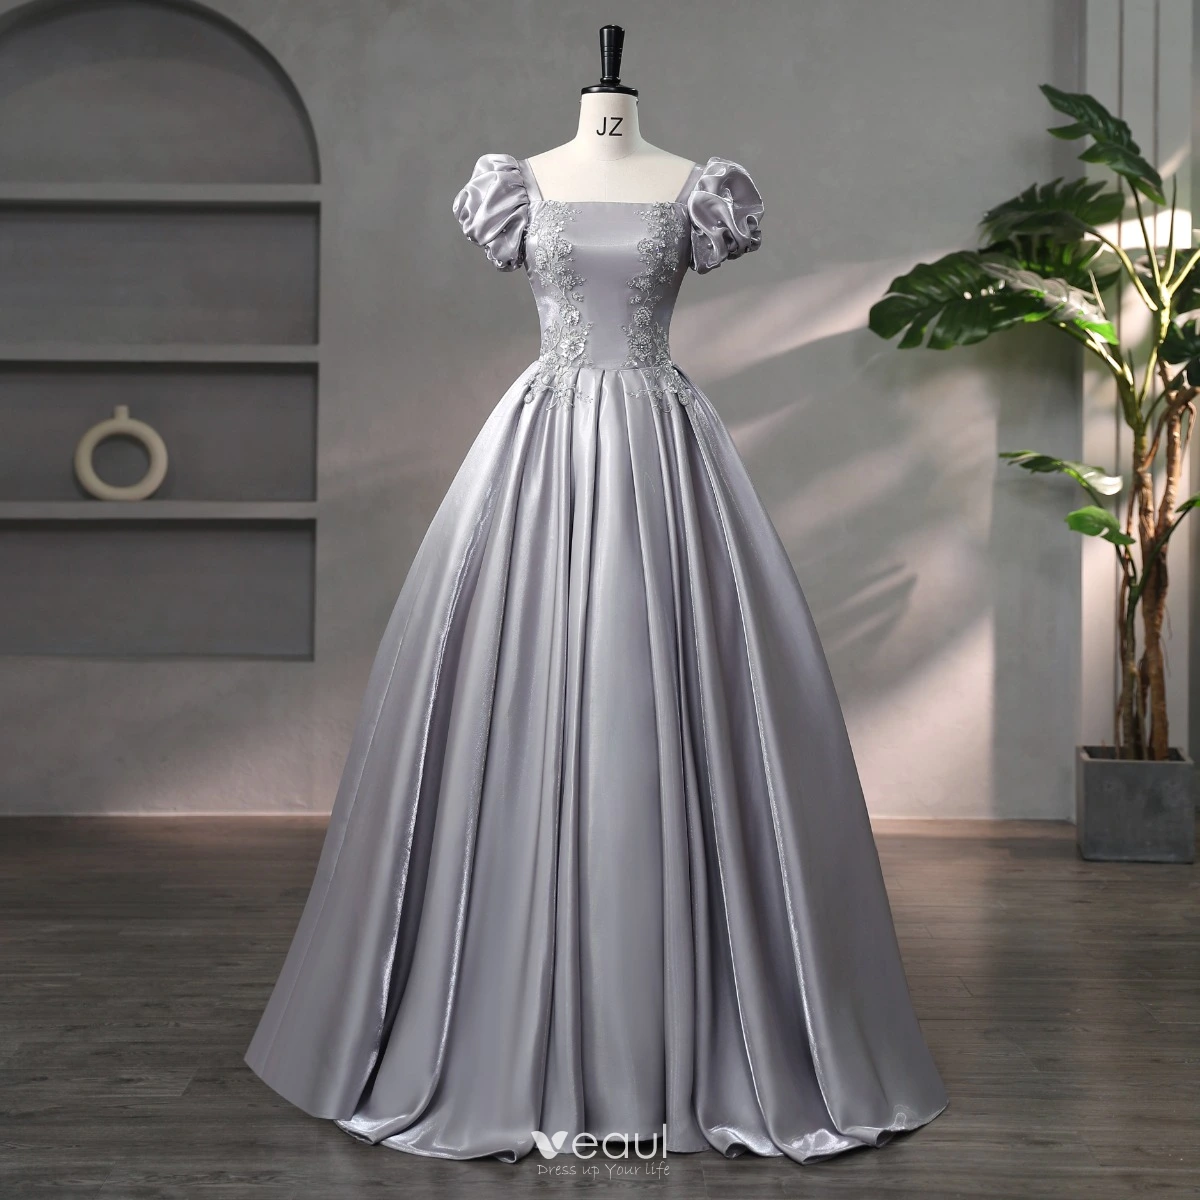 Fashionable Stars Embellished Grey Tulle Prom Gown - Xdressy